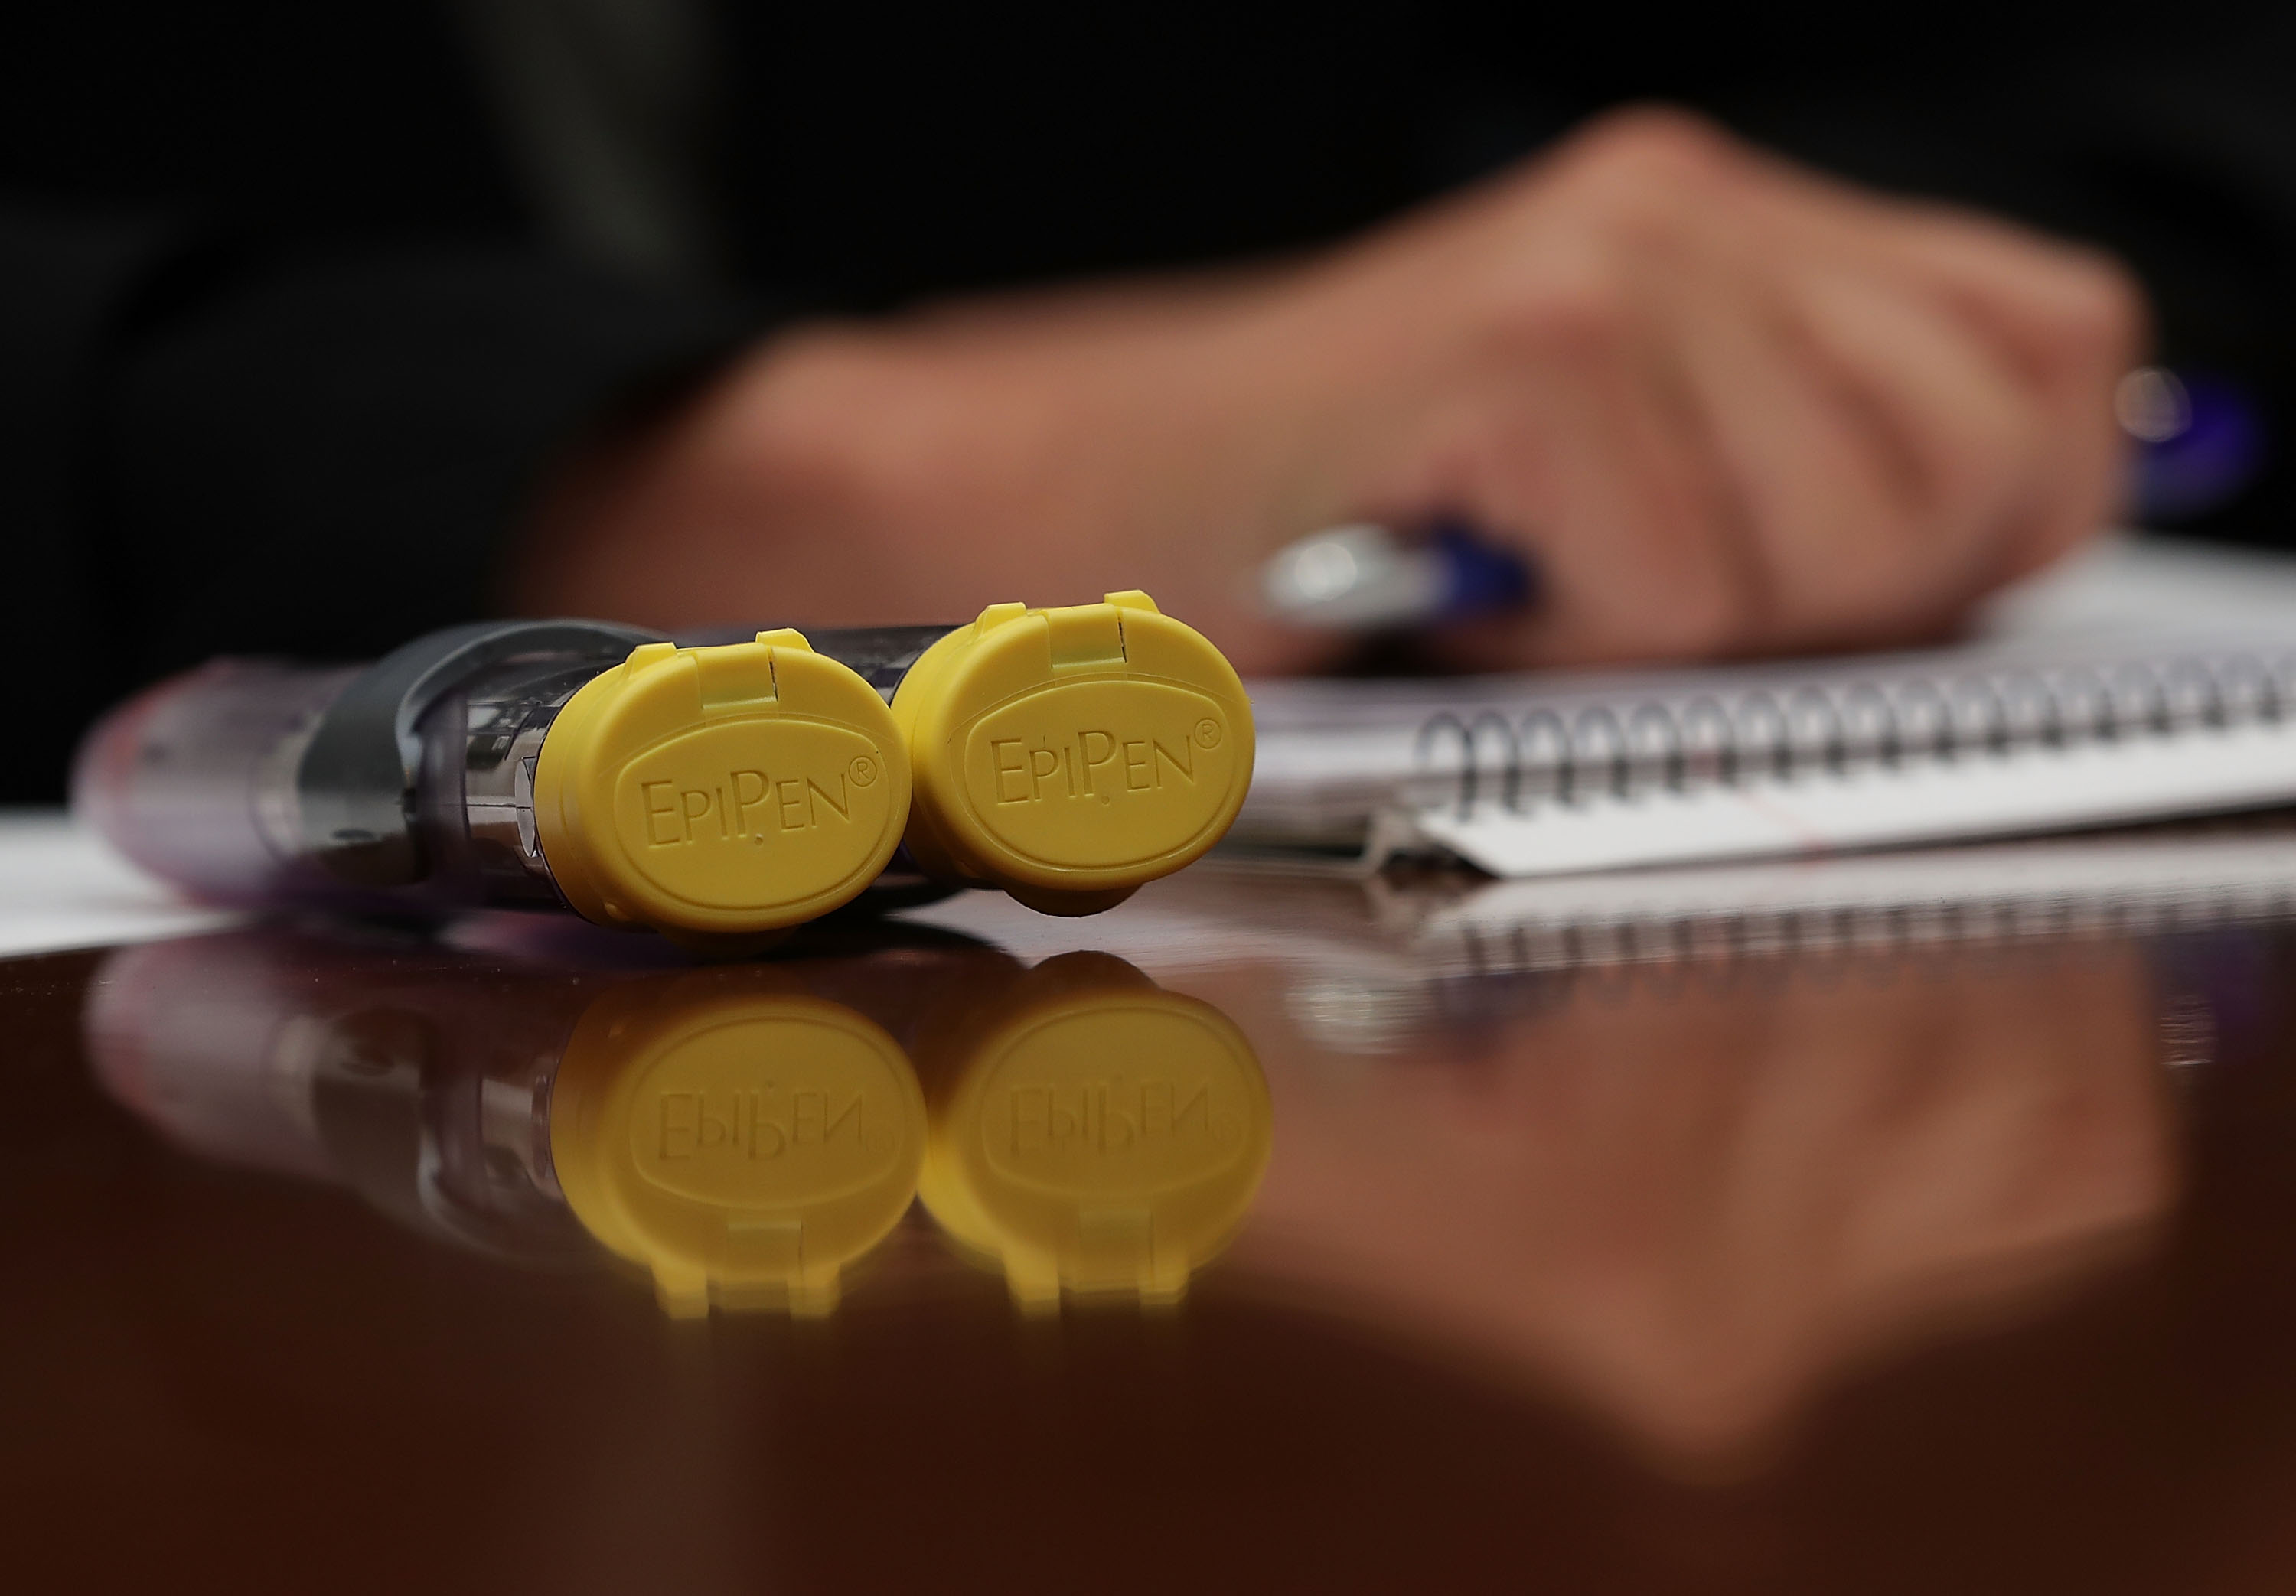 A 2-pack of EpiPen is seen on the witness table during a hearing before the House Oversight and Government Reform Committee September 21, 2016 on Capitol Hill in Washington, D.C. (Alex Wong&mdash;Getty Images)